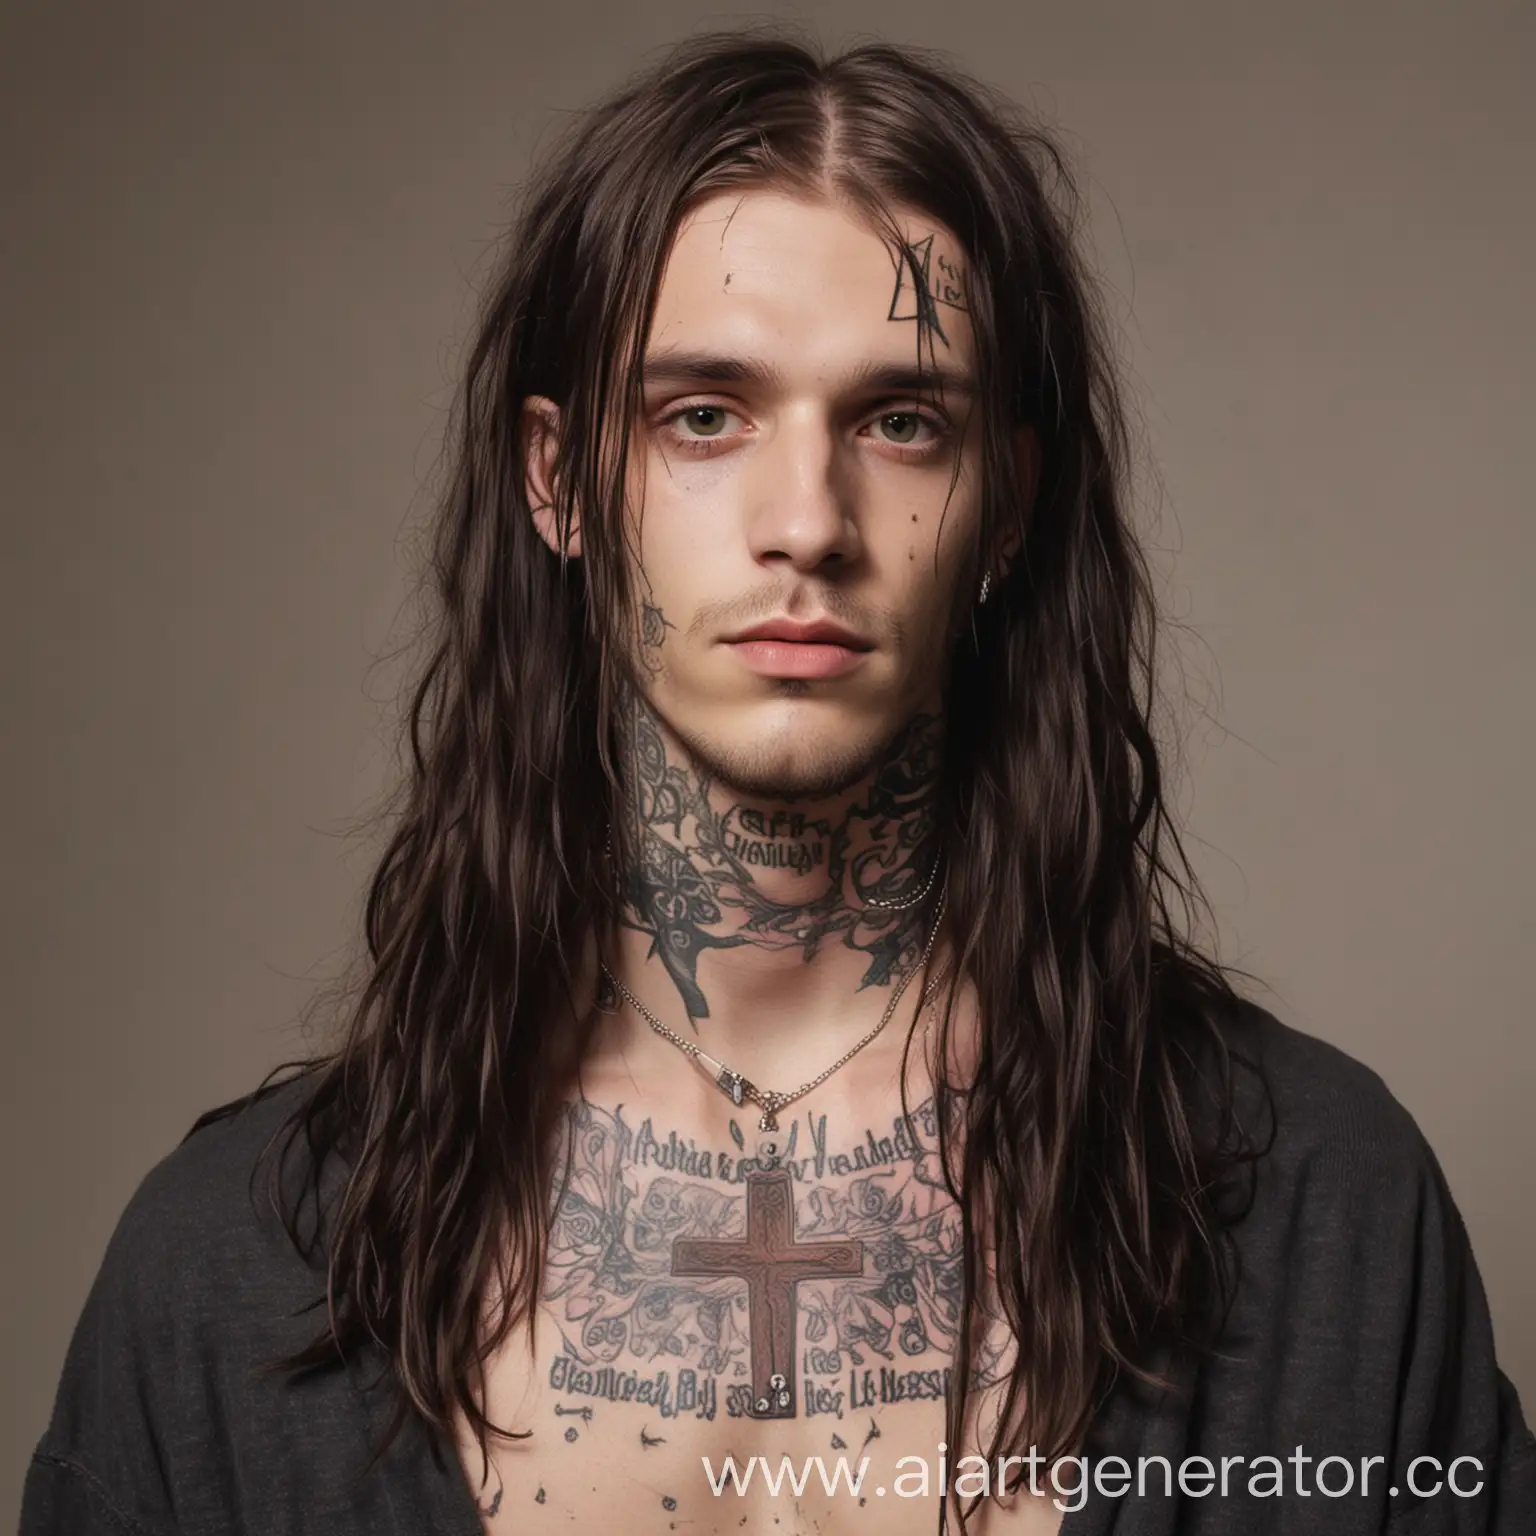 Celebrity-Transformation-Lil-Peep-Portrayed-as-Jesus-with-Long-Hair